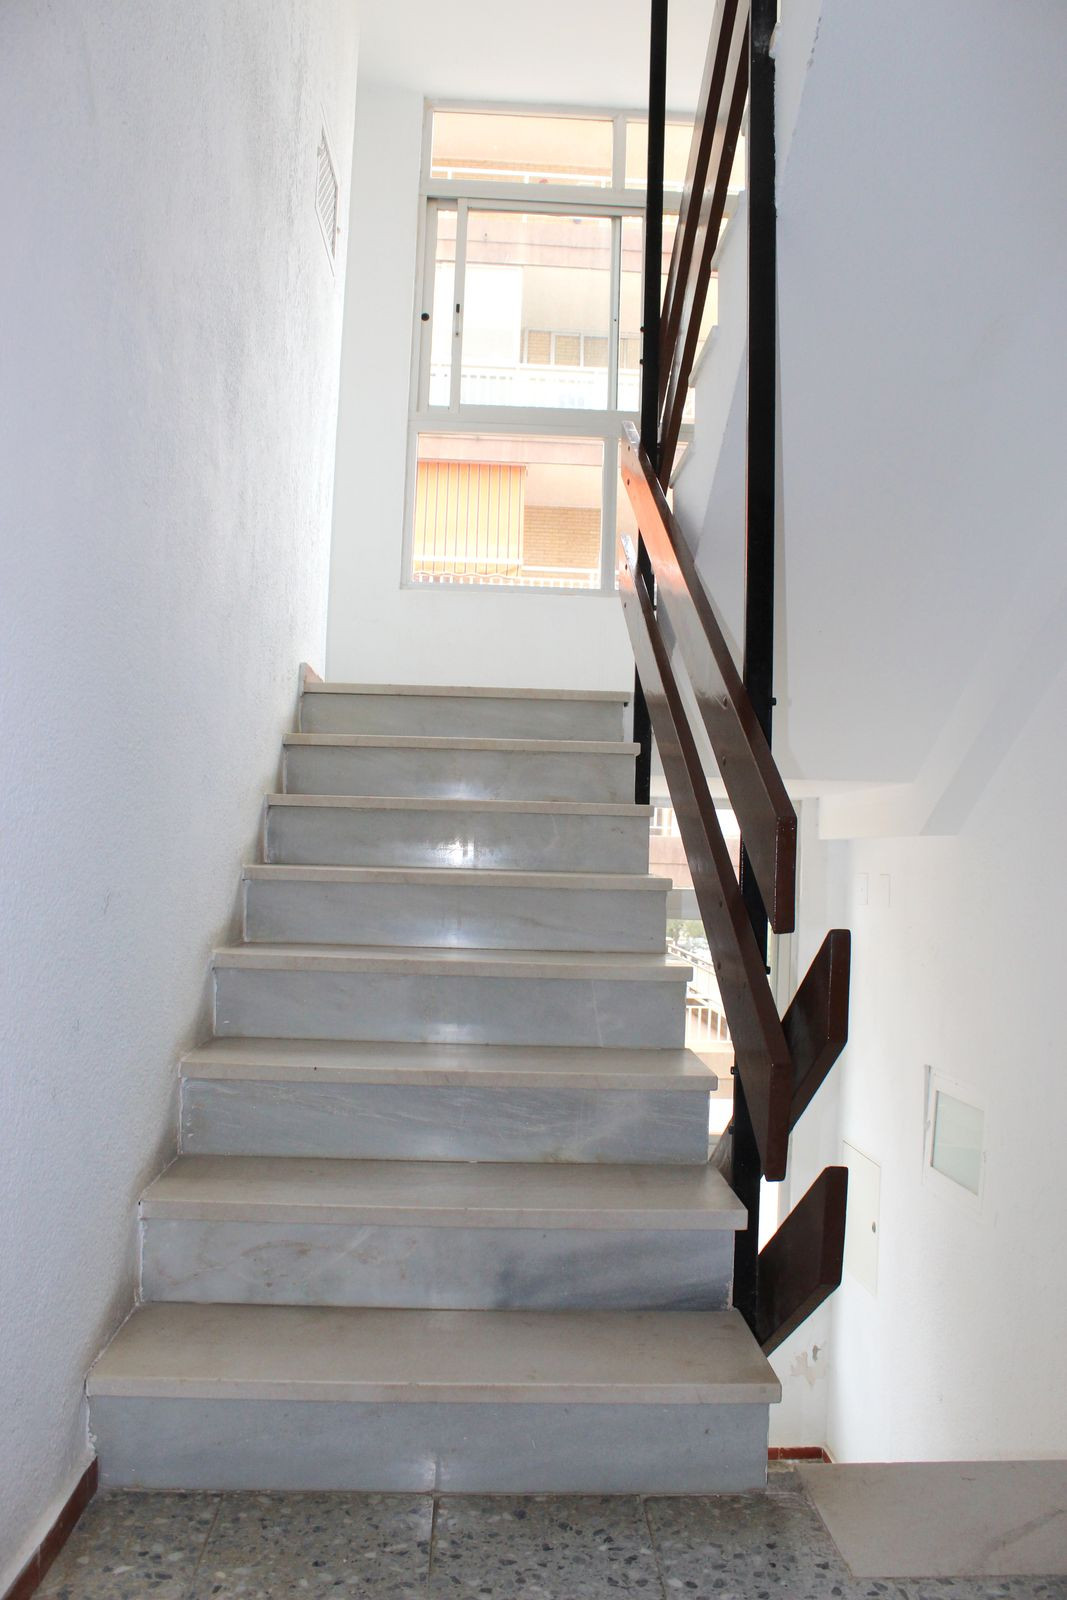 2 bedroom Apartment For Sale in Los Boliches, Málaga - thumb 24